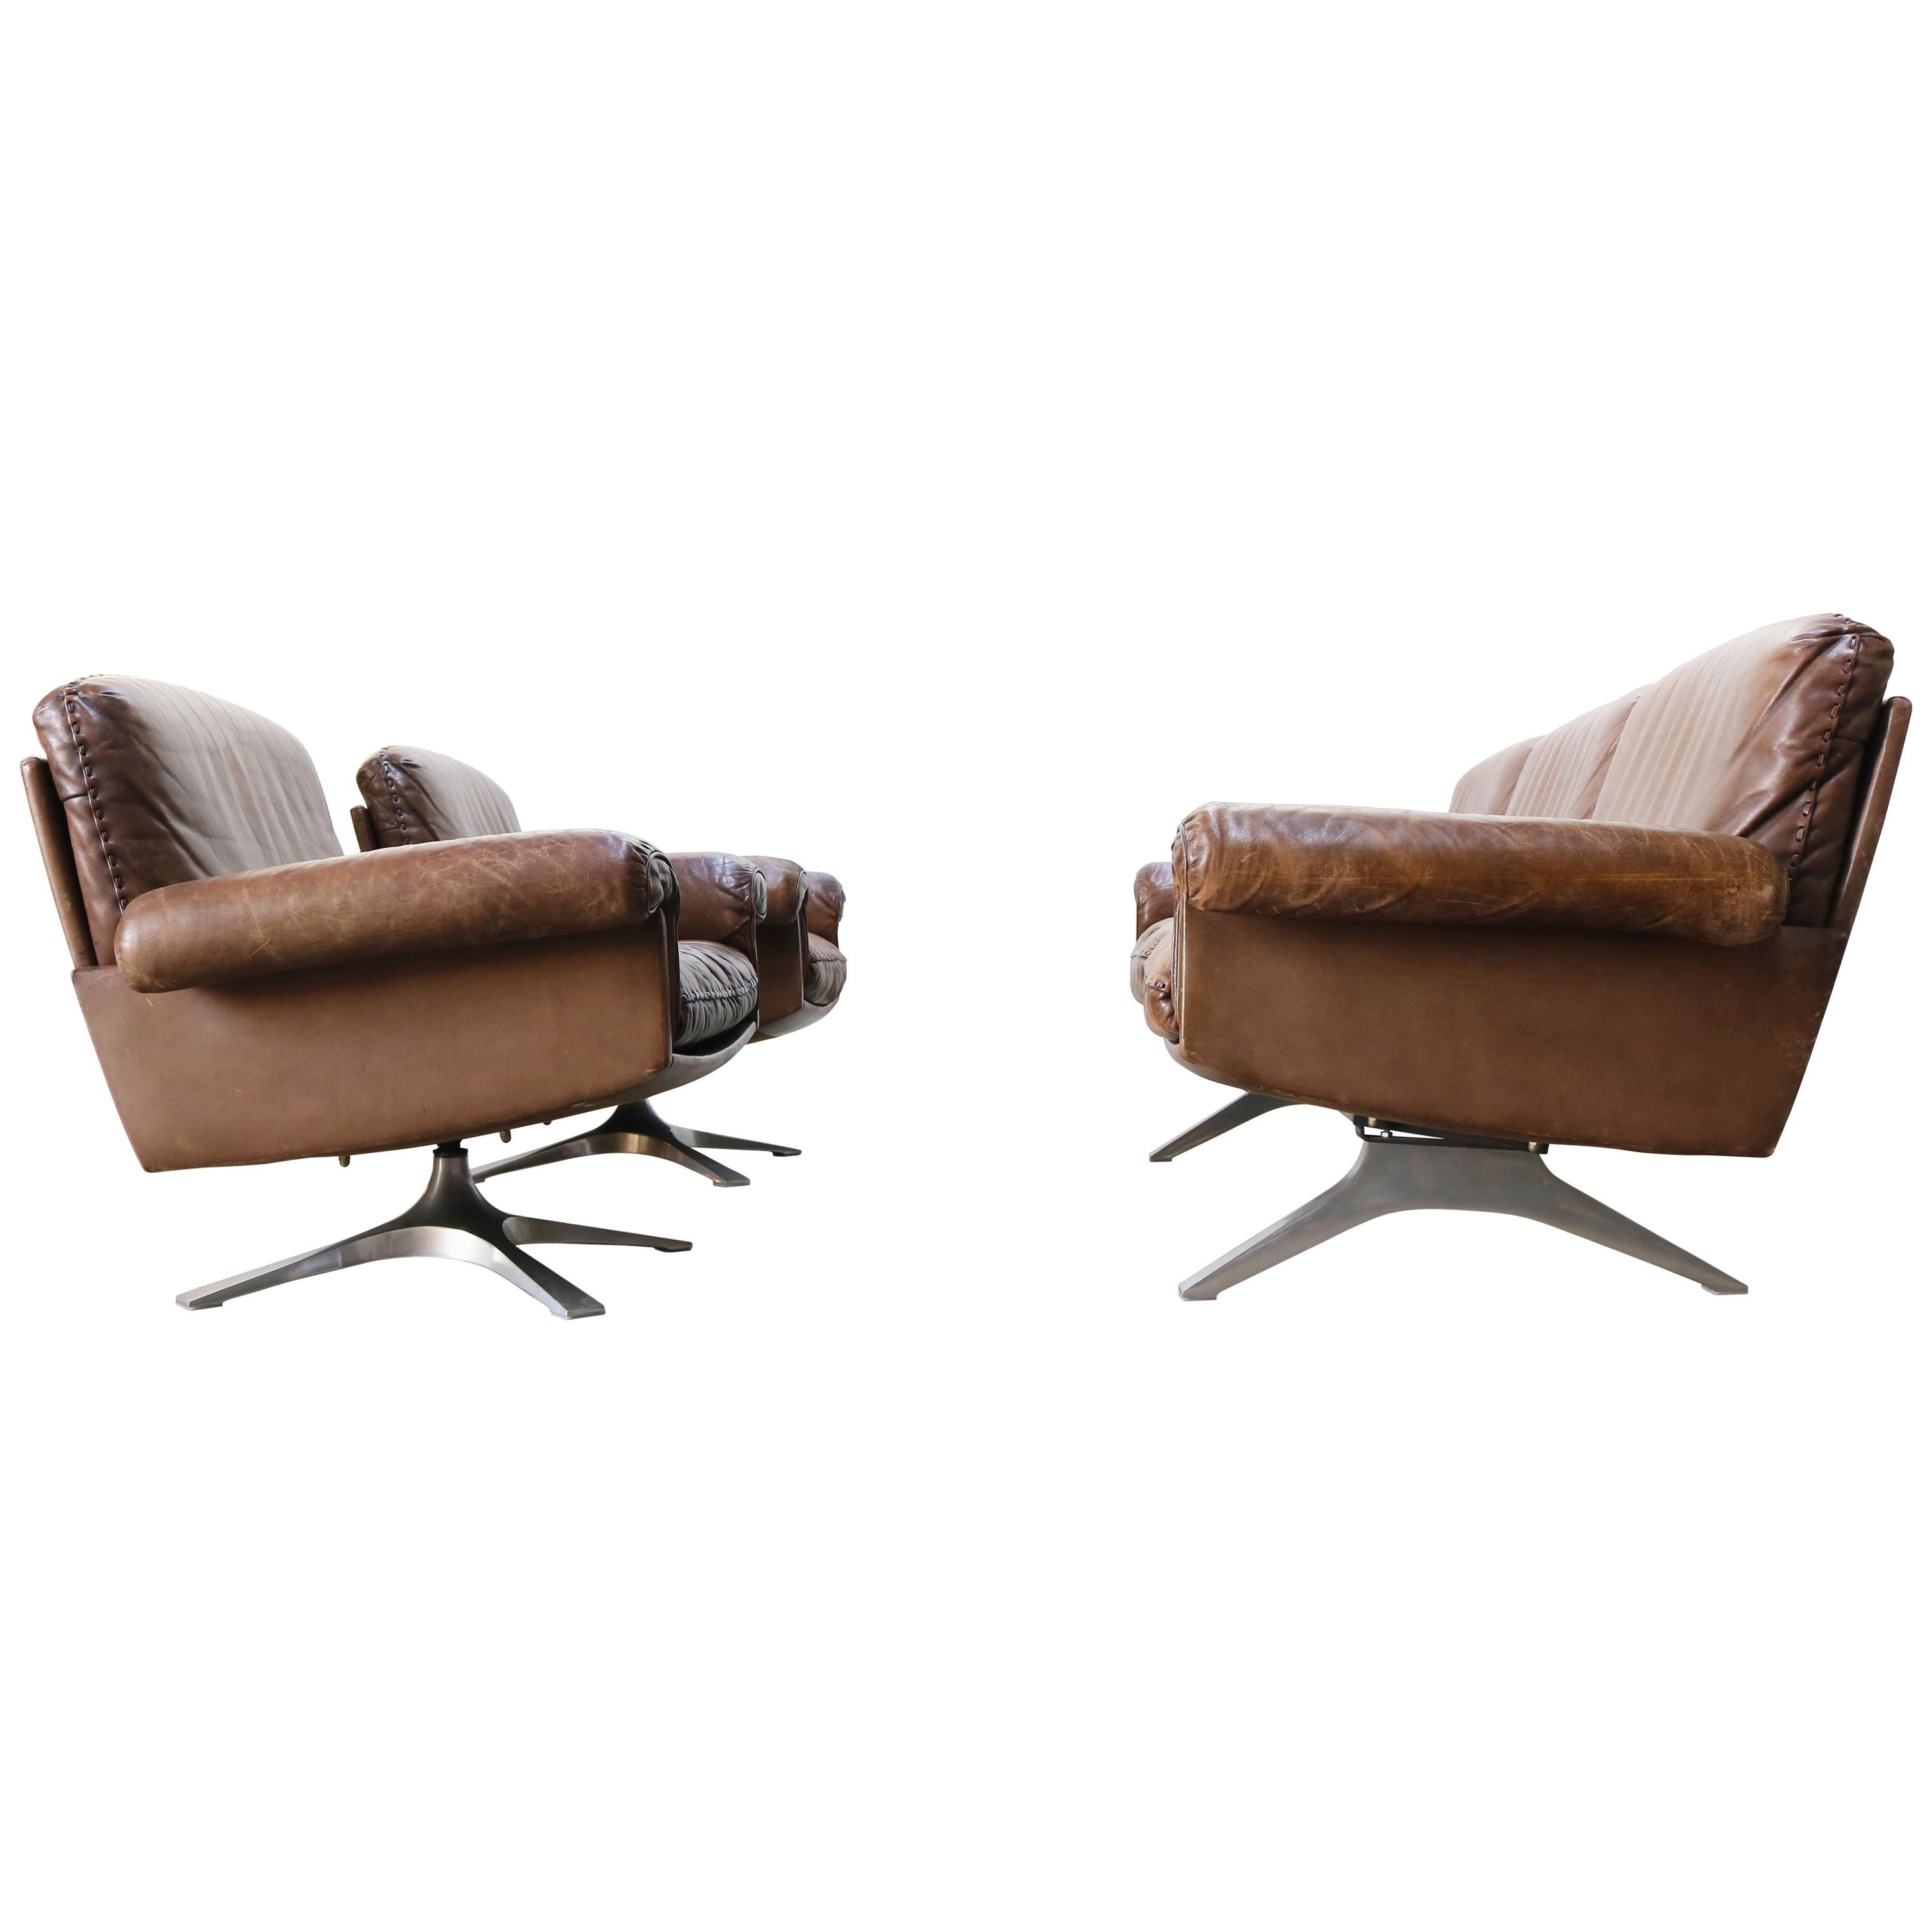 Swiss De Sede DS 31 Set Three-Seat Sofa and 2 Swivel Lounge Chairs, 1970s Brown